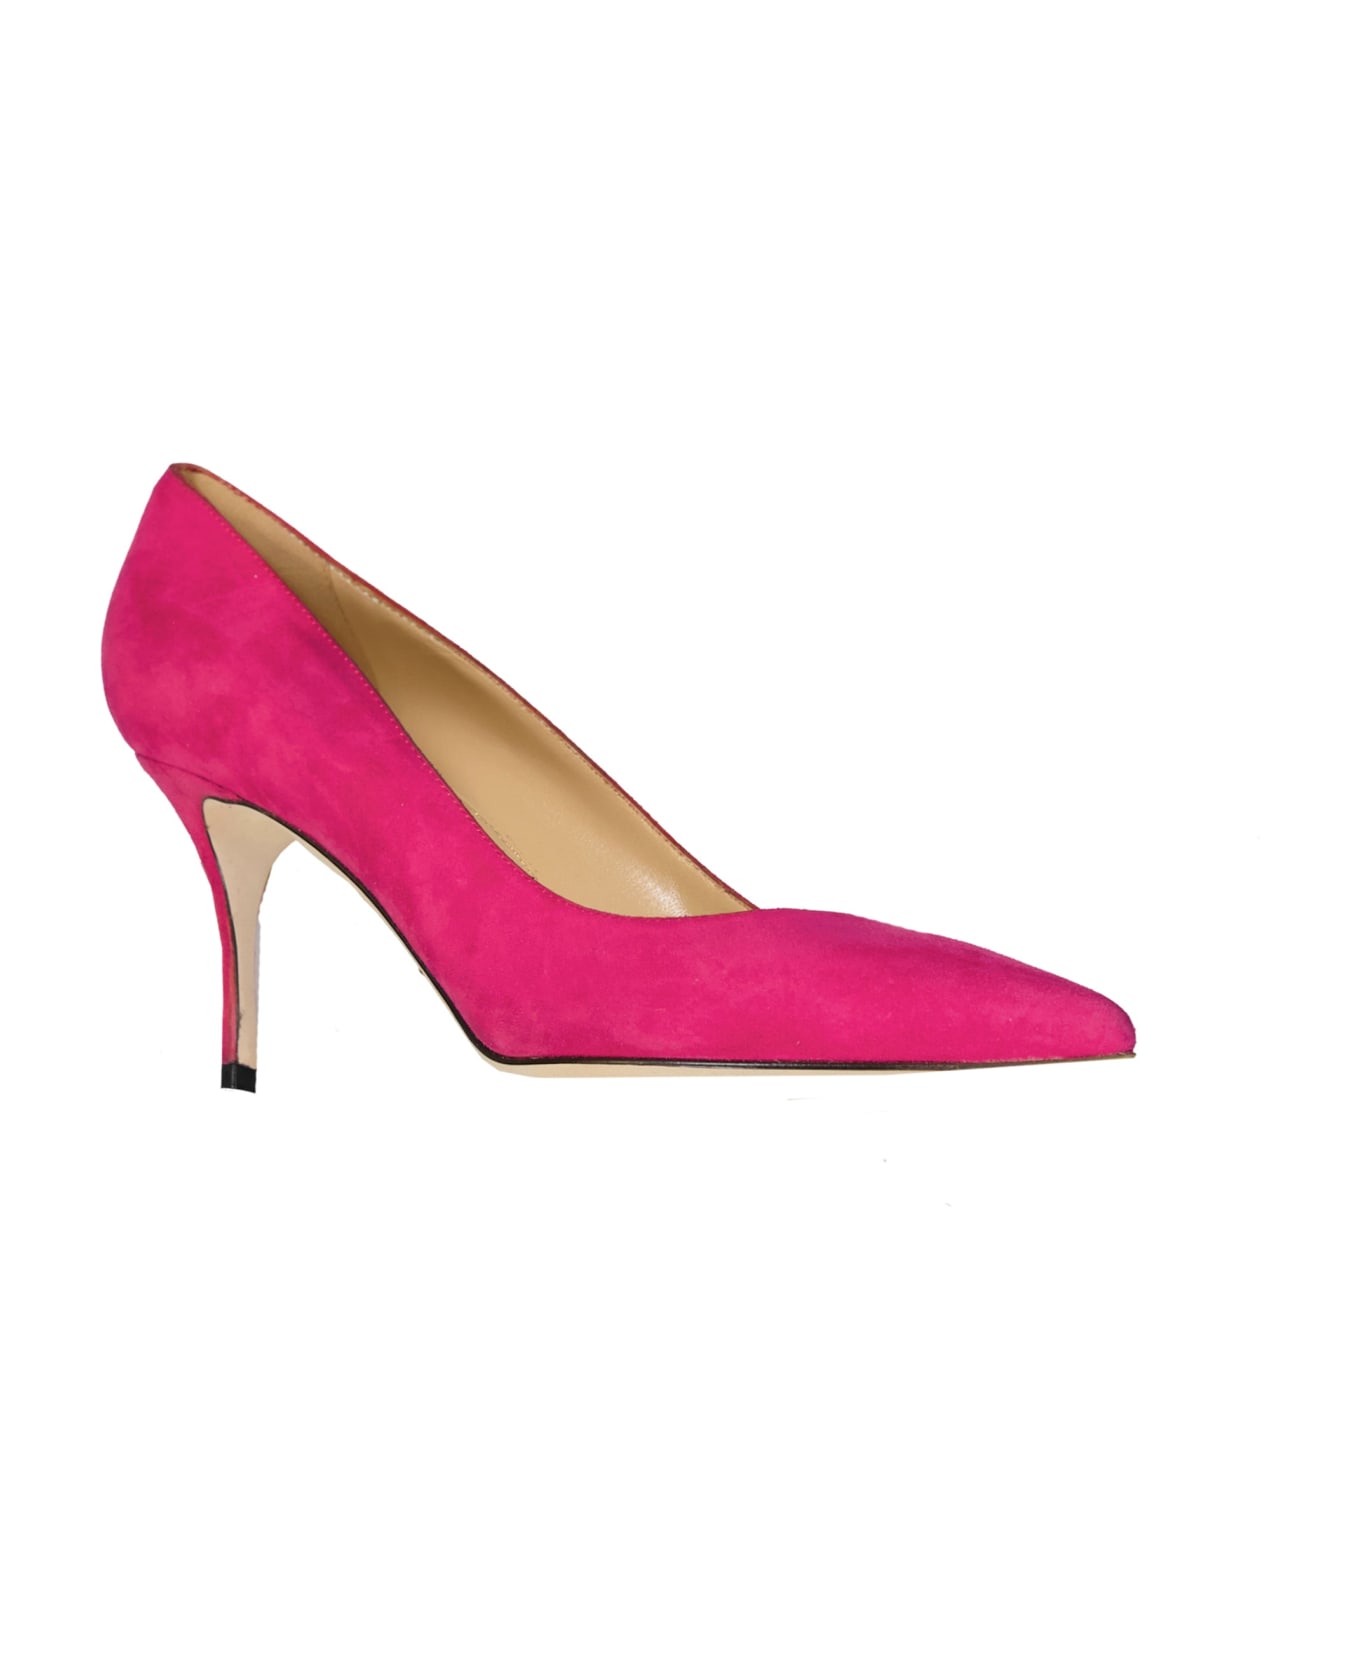 Sergio Rossi Suede Pumps - Pink ハイヒール